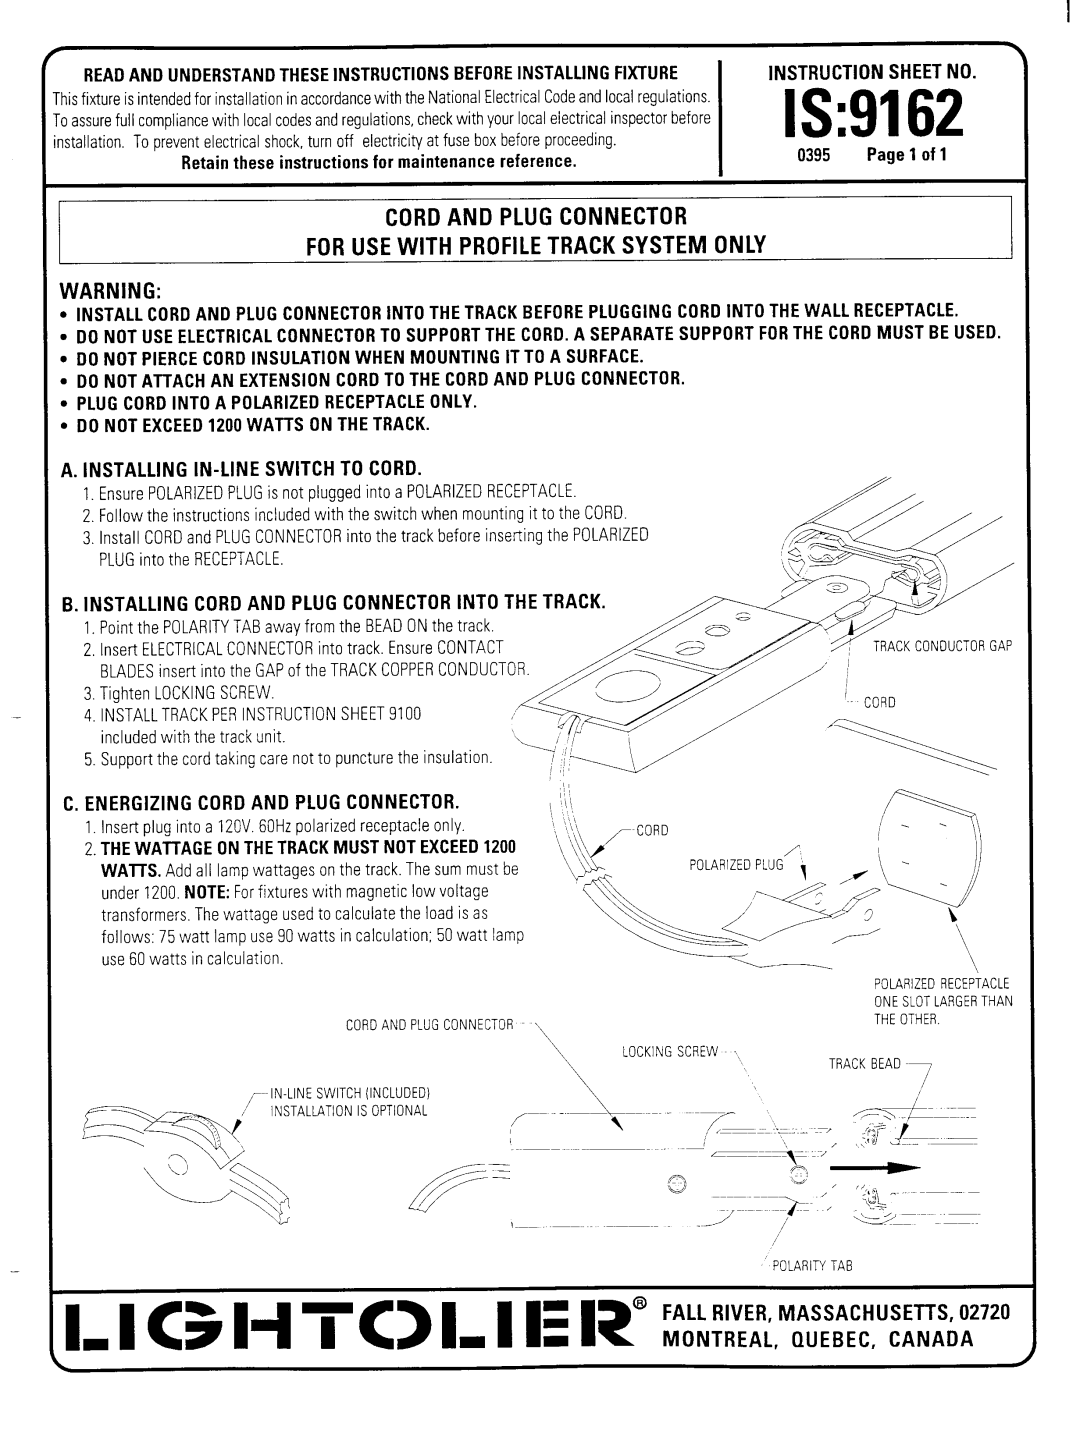 Lightolier 9162 instruction sheet Is, Cord And Plug Connector, For Use With Profile Track System Only, l,,1’\‘ 